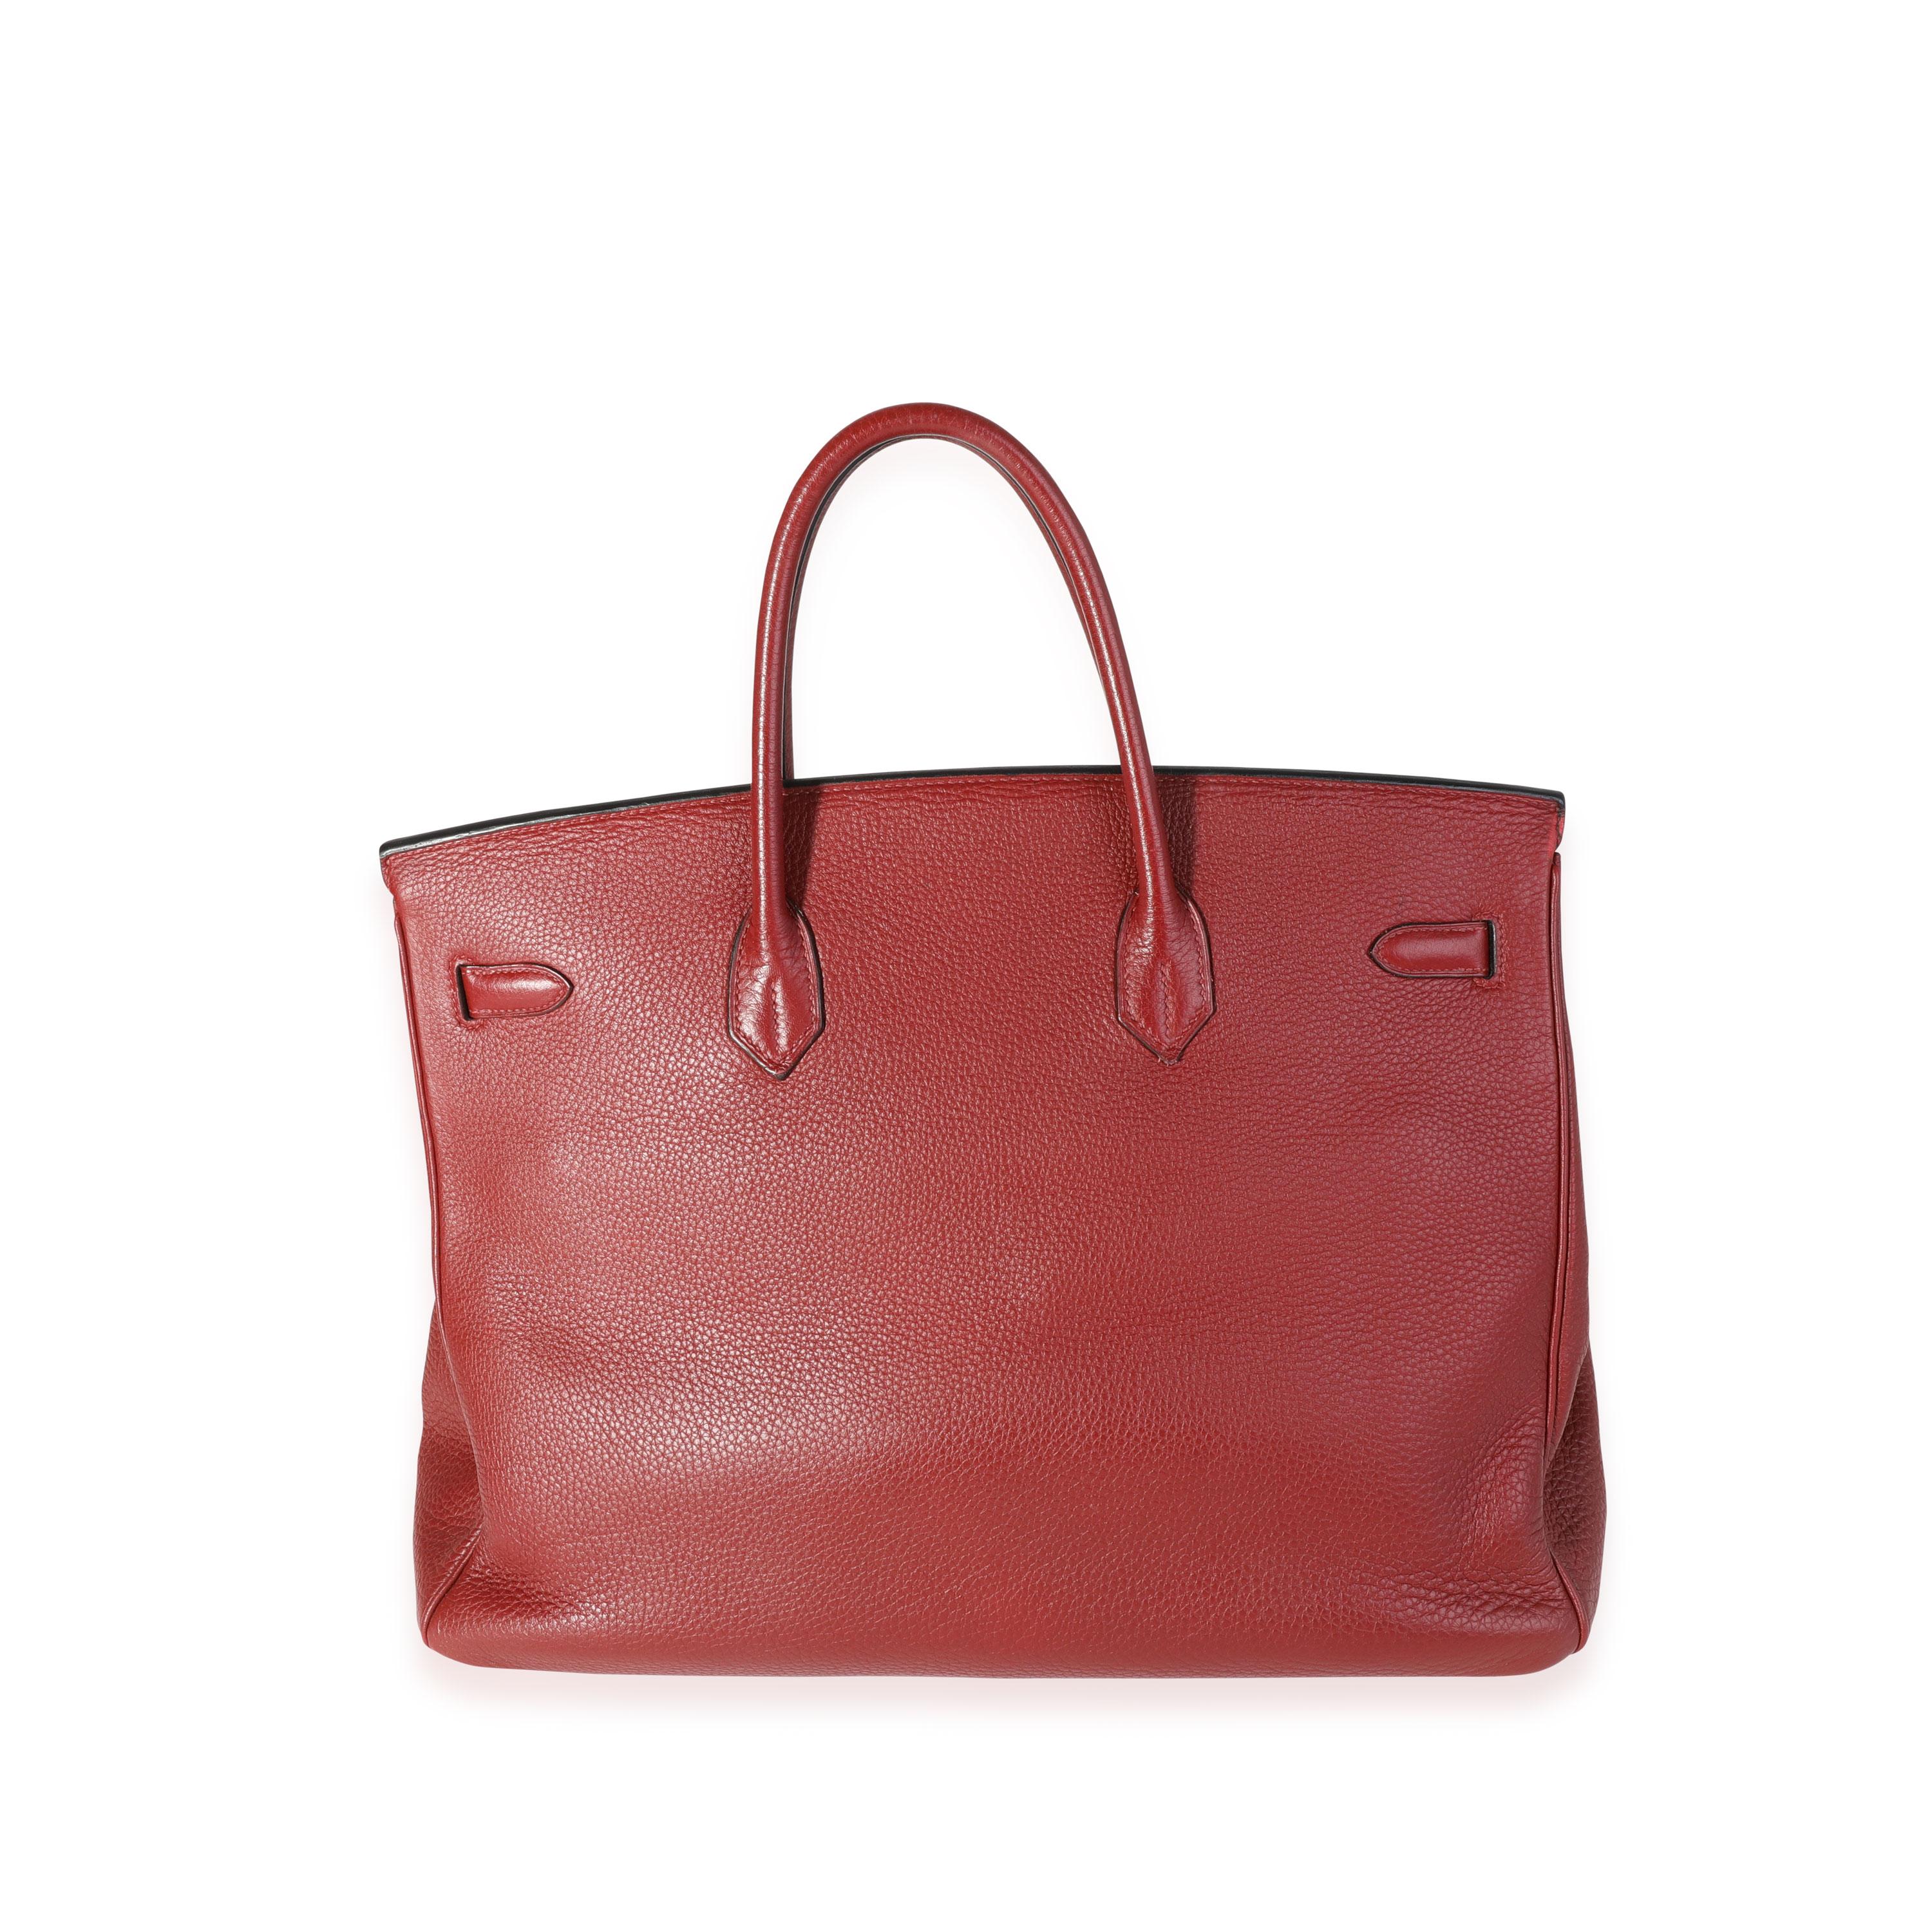 Listing Title: Hermès Rouge H Clémence Birkin 40 PHW
SKU: 118578
Condition: Pre-owned (3000)
Handbag Condition: Very Good
Condition Comments: Very Good Condition. Light scuffing to corners. Scratching to hardware. Marks to interior.
Brand: